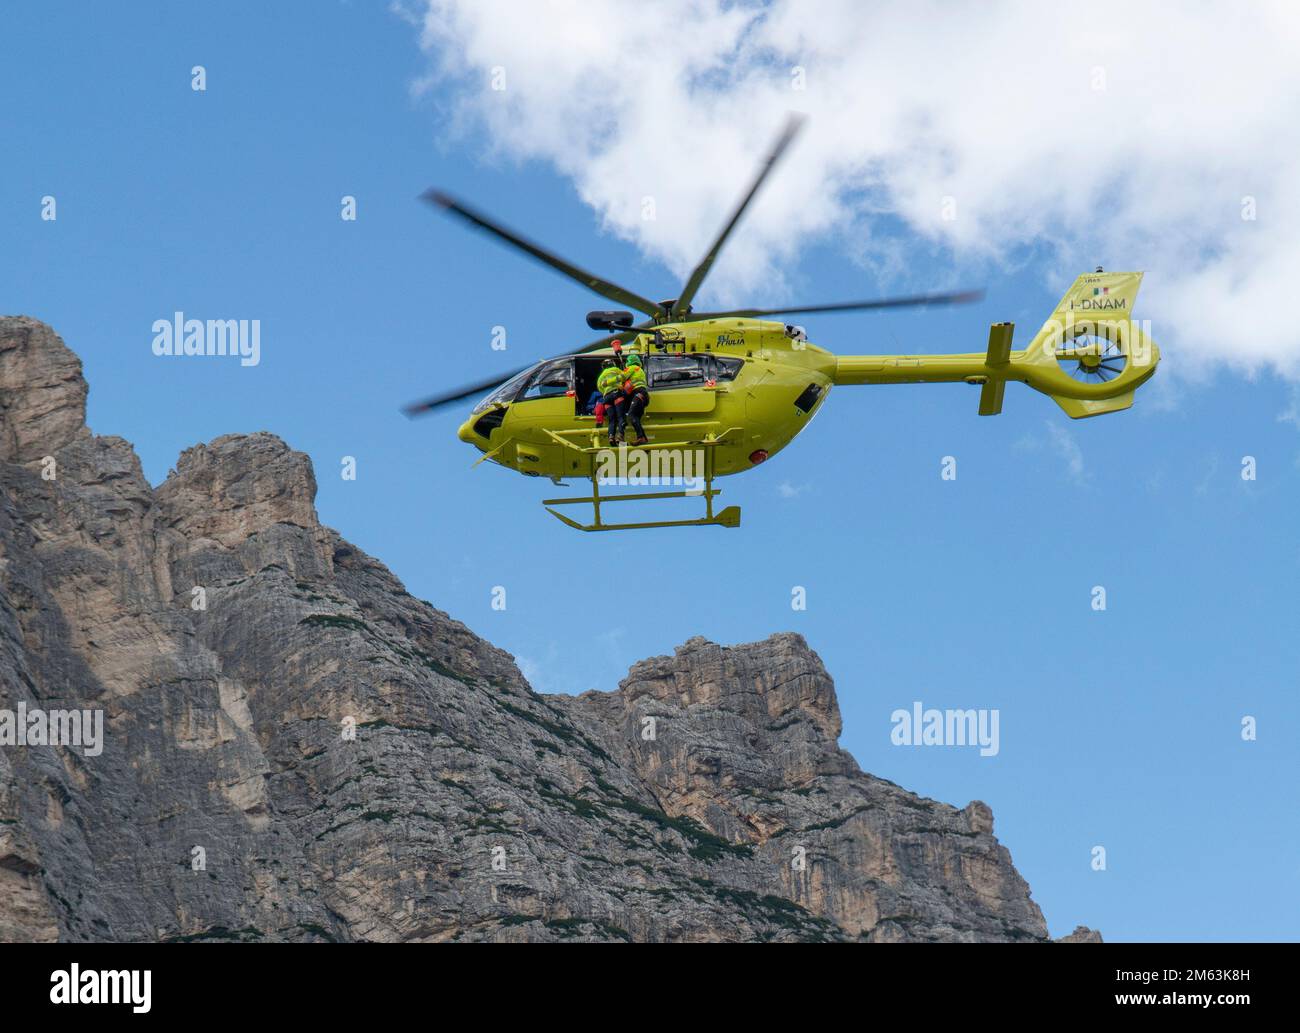 Fiames, Cortina d'Ampezzo, Dolomites, Italy - July, 6,  2022 : Helicopter Rescue Service. Medical first aid helicopter. Dolomites. Alps. Italy. Stock Photo